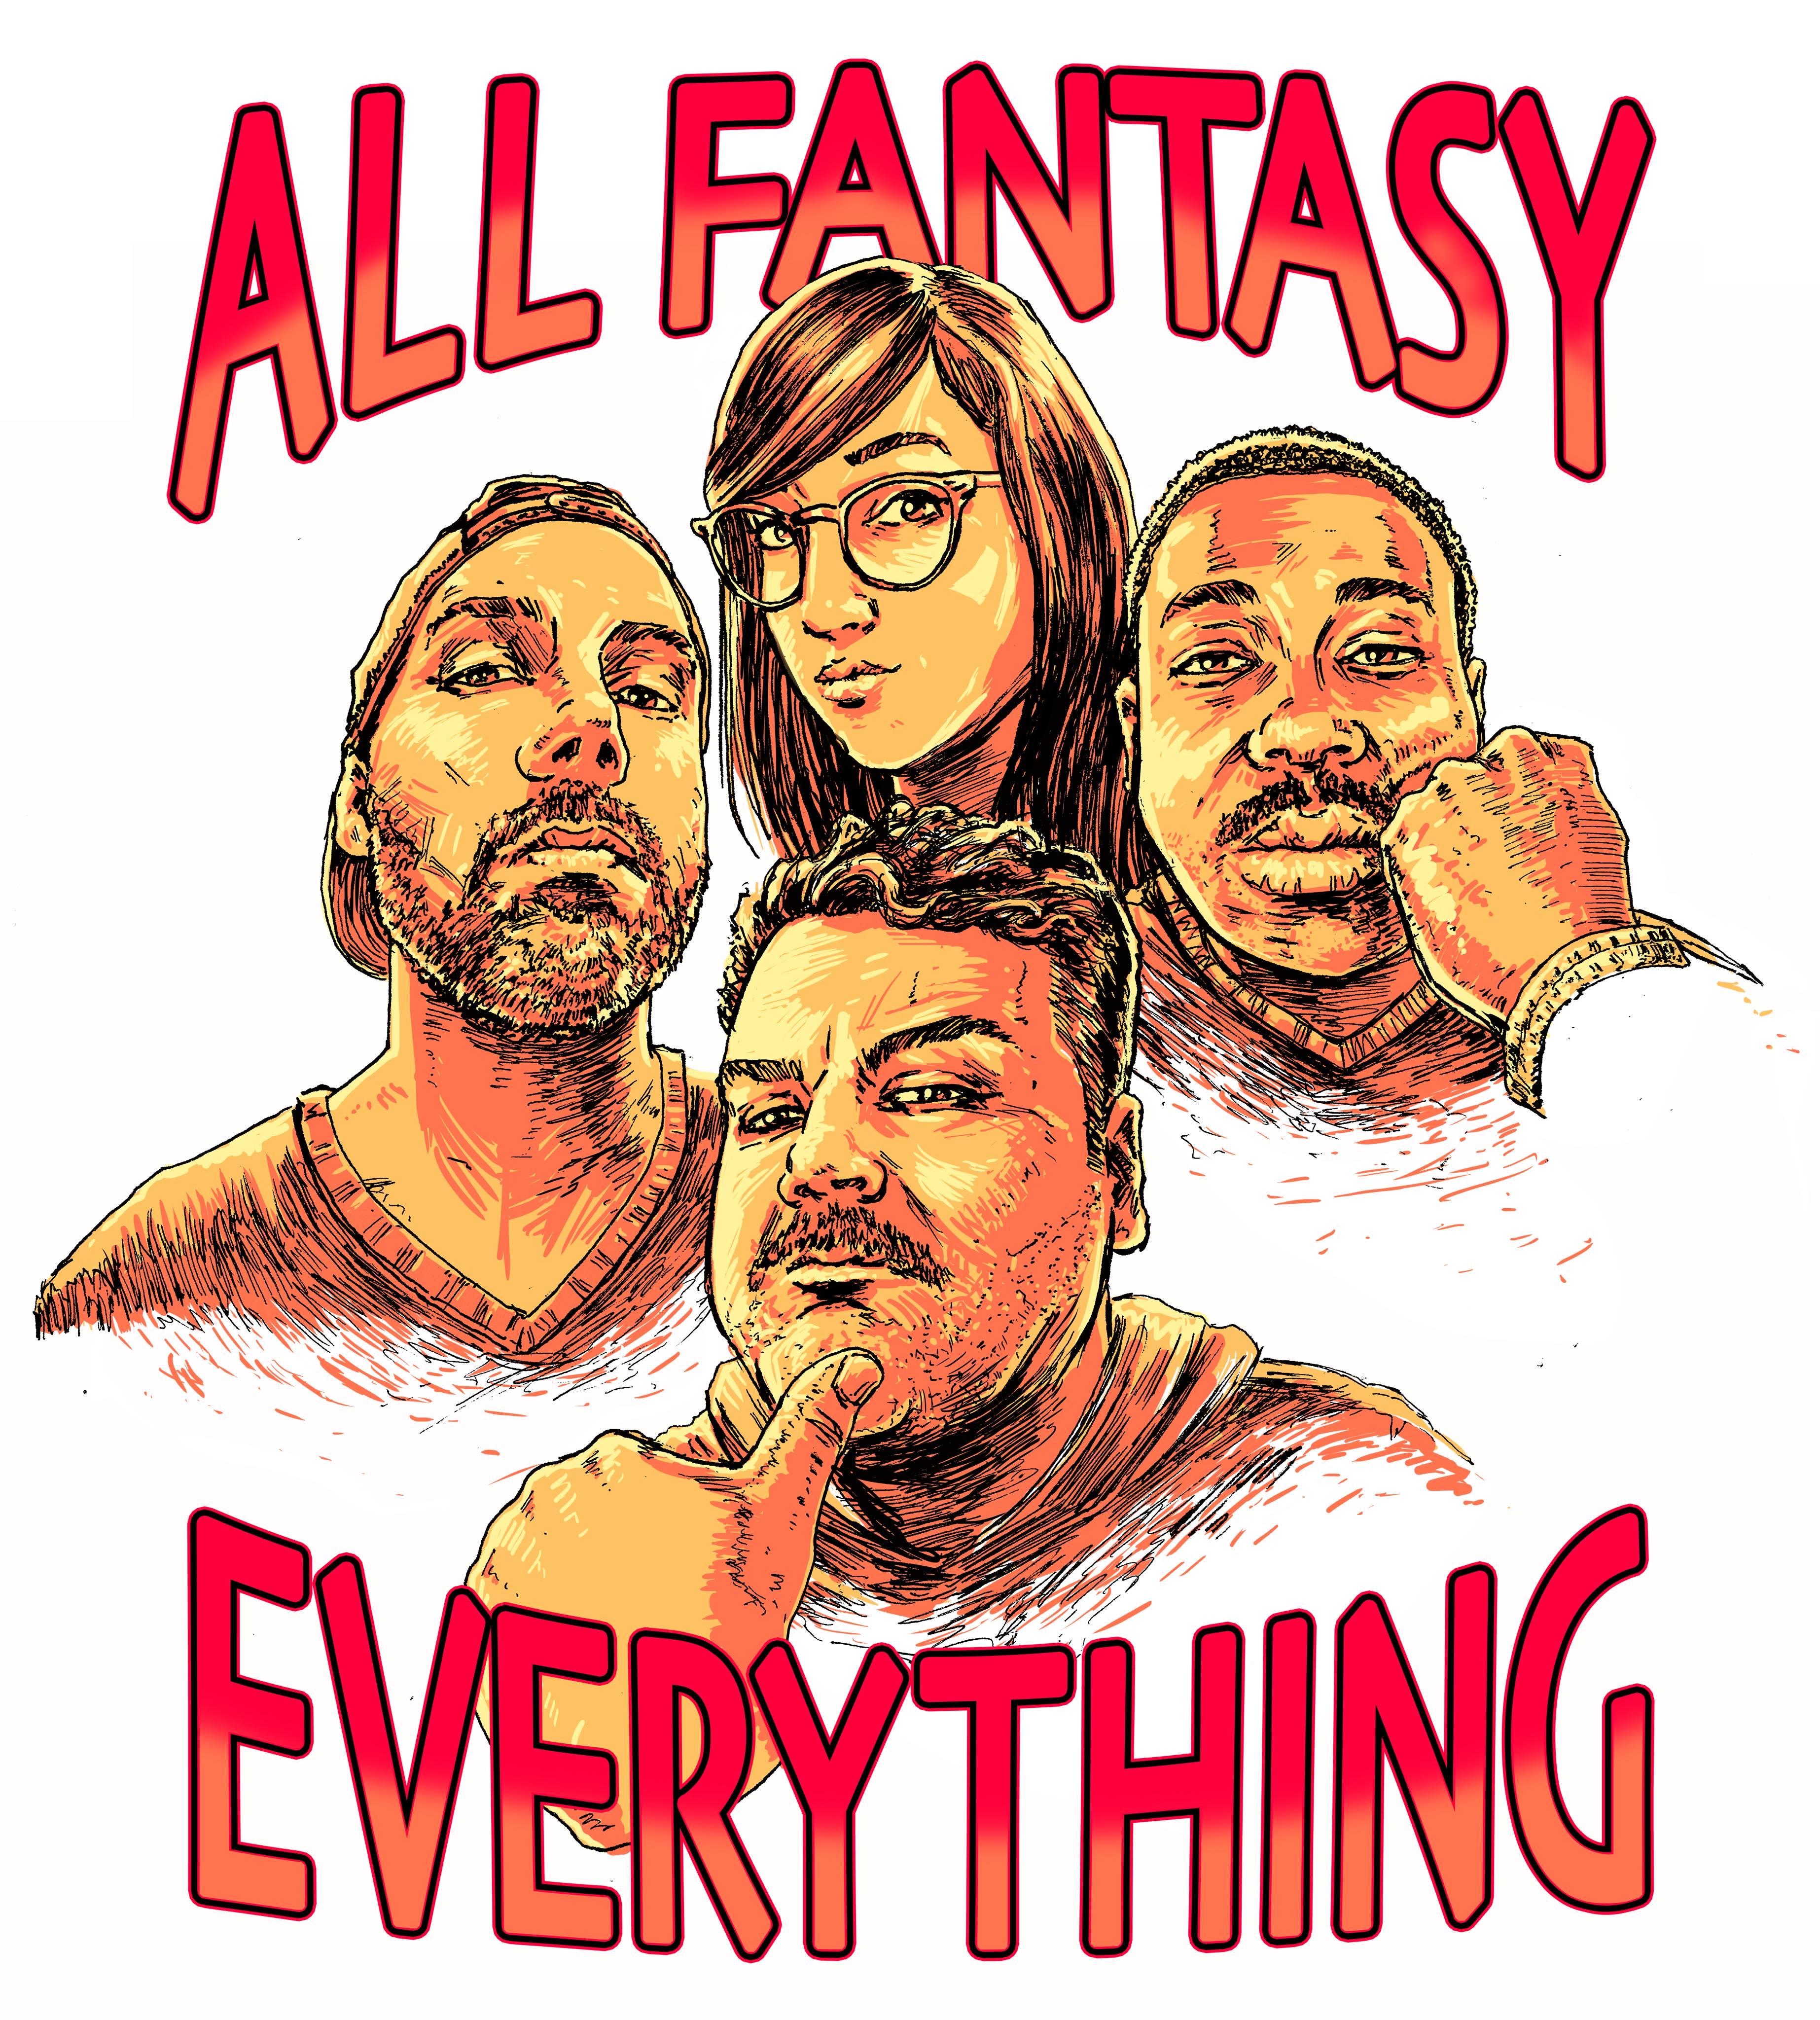 ALL FANTASY EVERYTHING with Ian Karmel (Late Late Show Head Writer, CONAN)